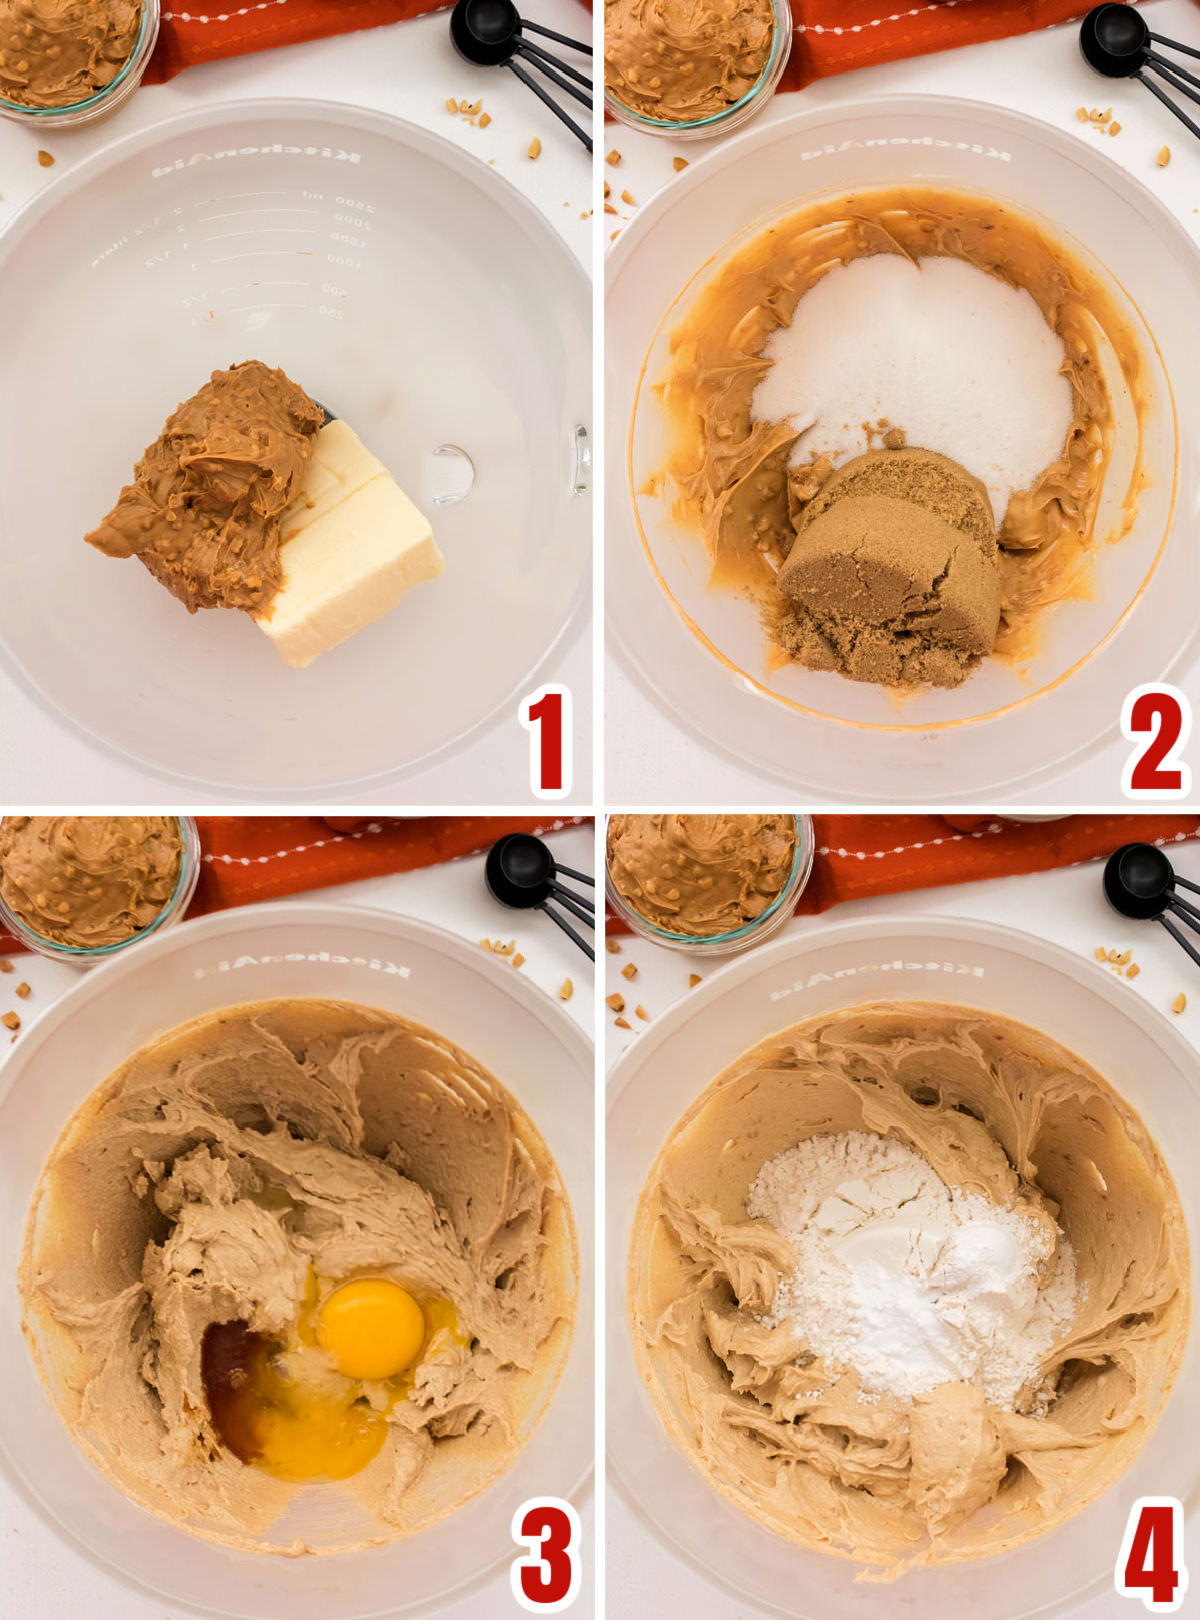 Collage image showing the steps for making the peanut butter cookie dough.